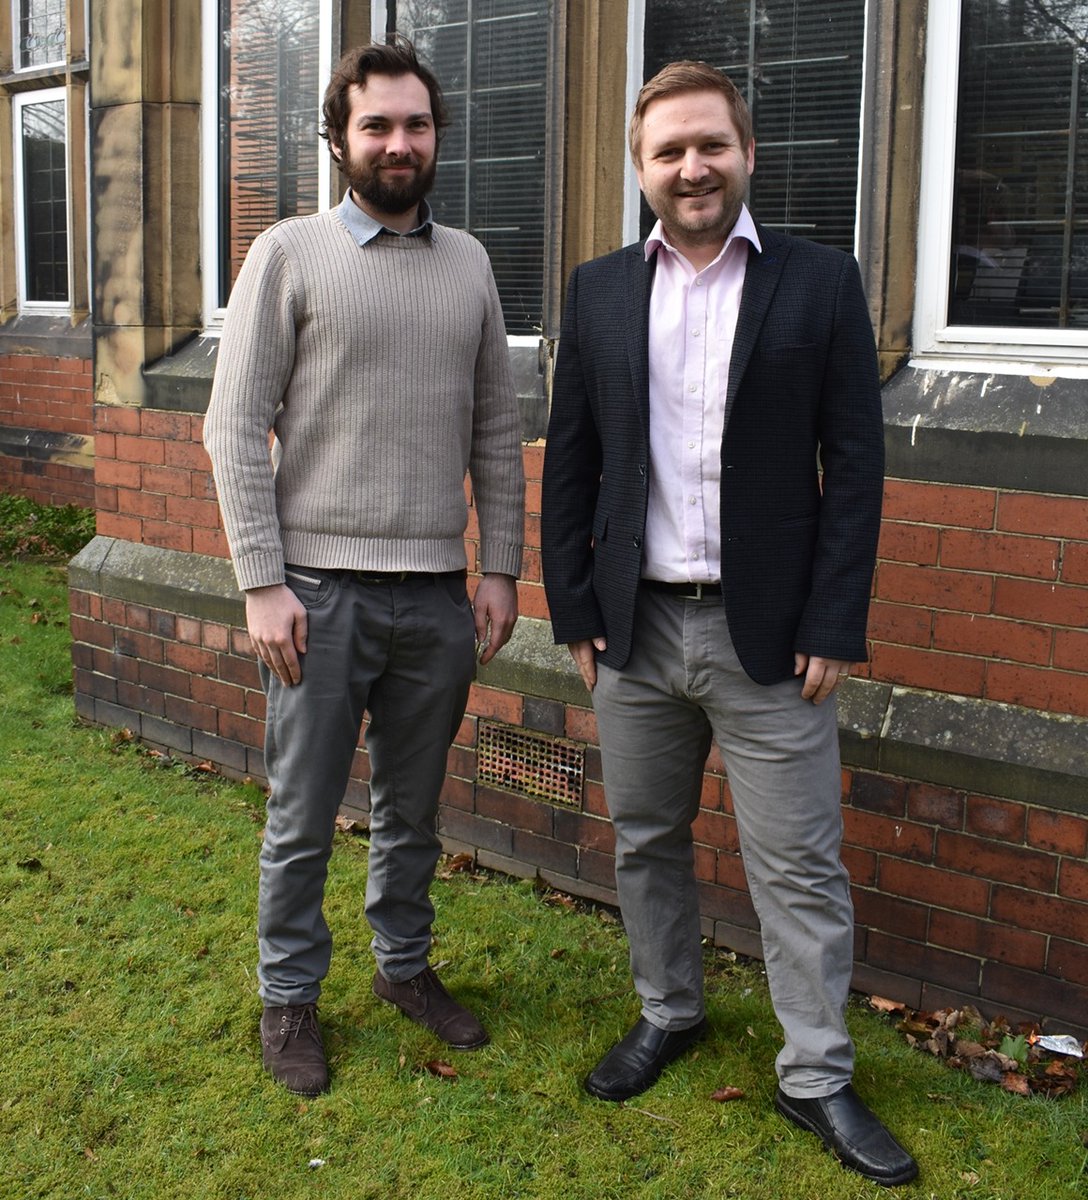 Big congratulations to Andrew Chapman, who has been promoted to director, and Tim Chesnutt who has become a full qualified architect at BBA, after successfully completing his RIBA part 3 exams!! 🙌🙌architectsdatafile.co.uk/news/two-promo…